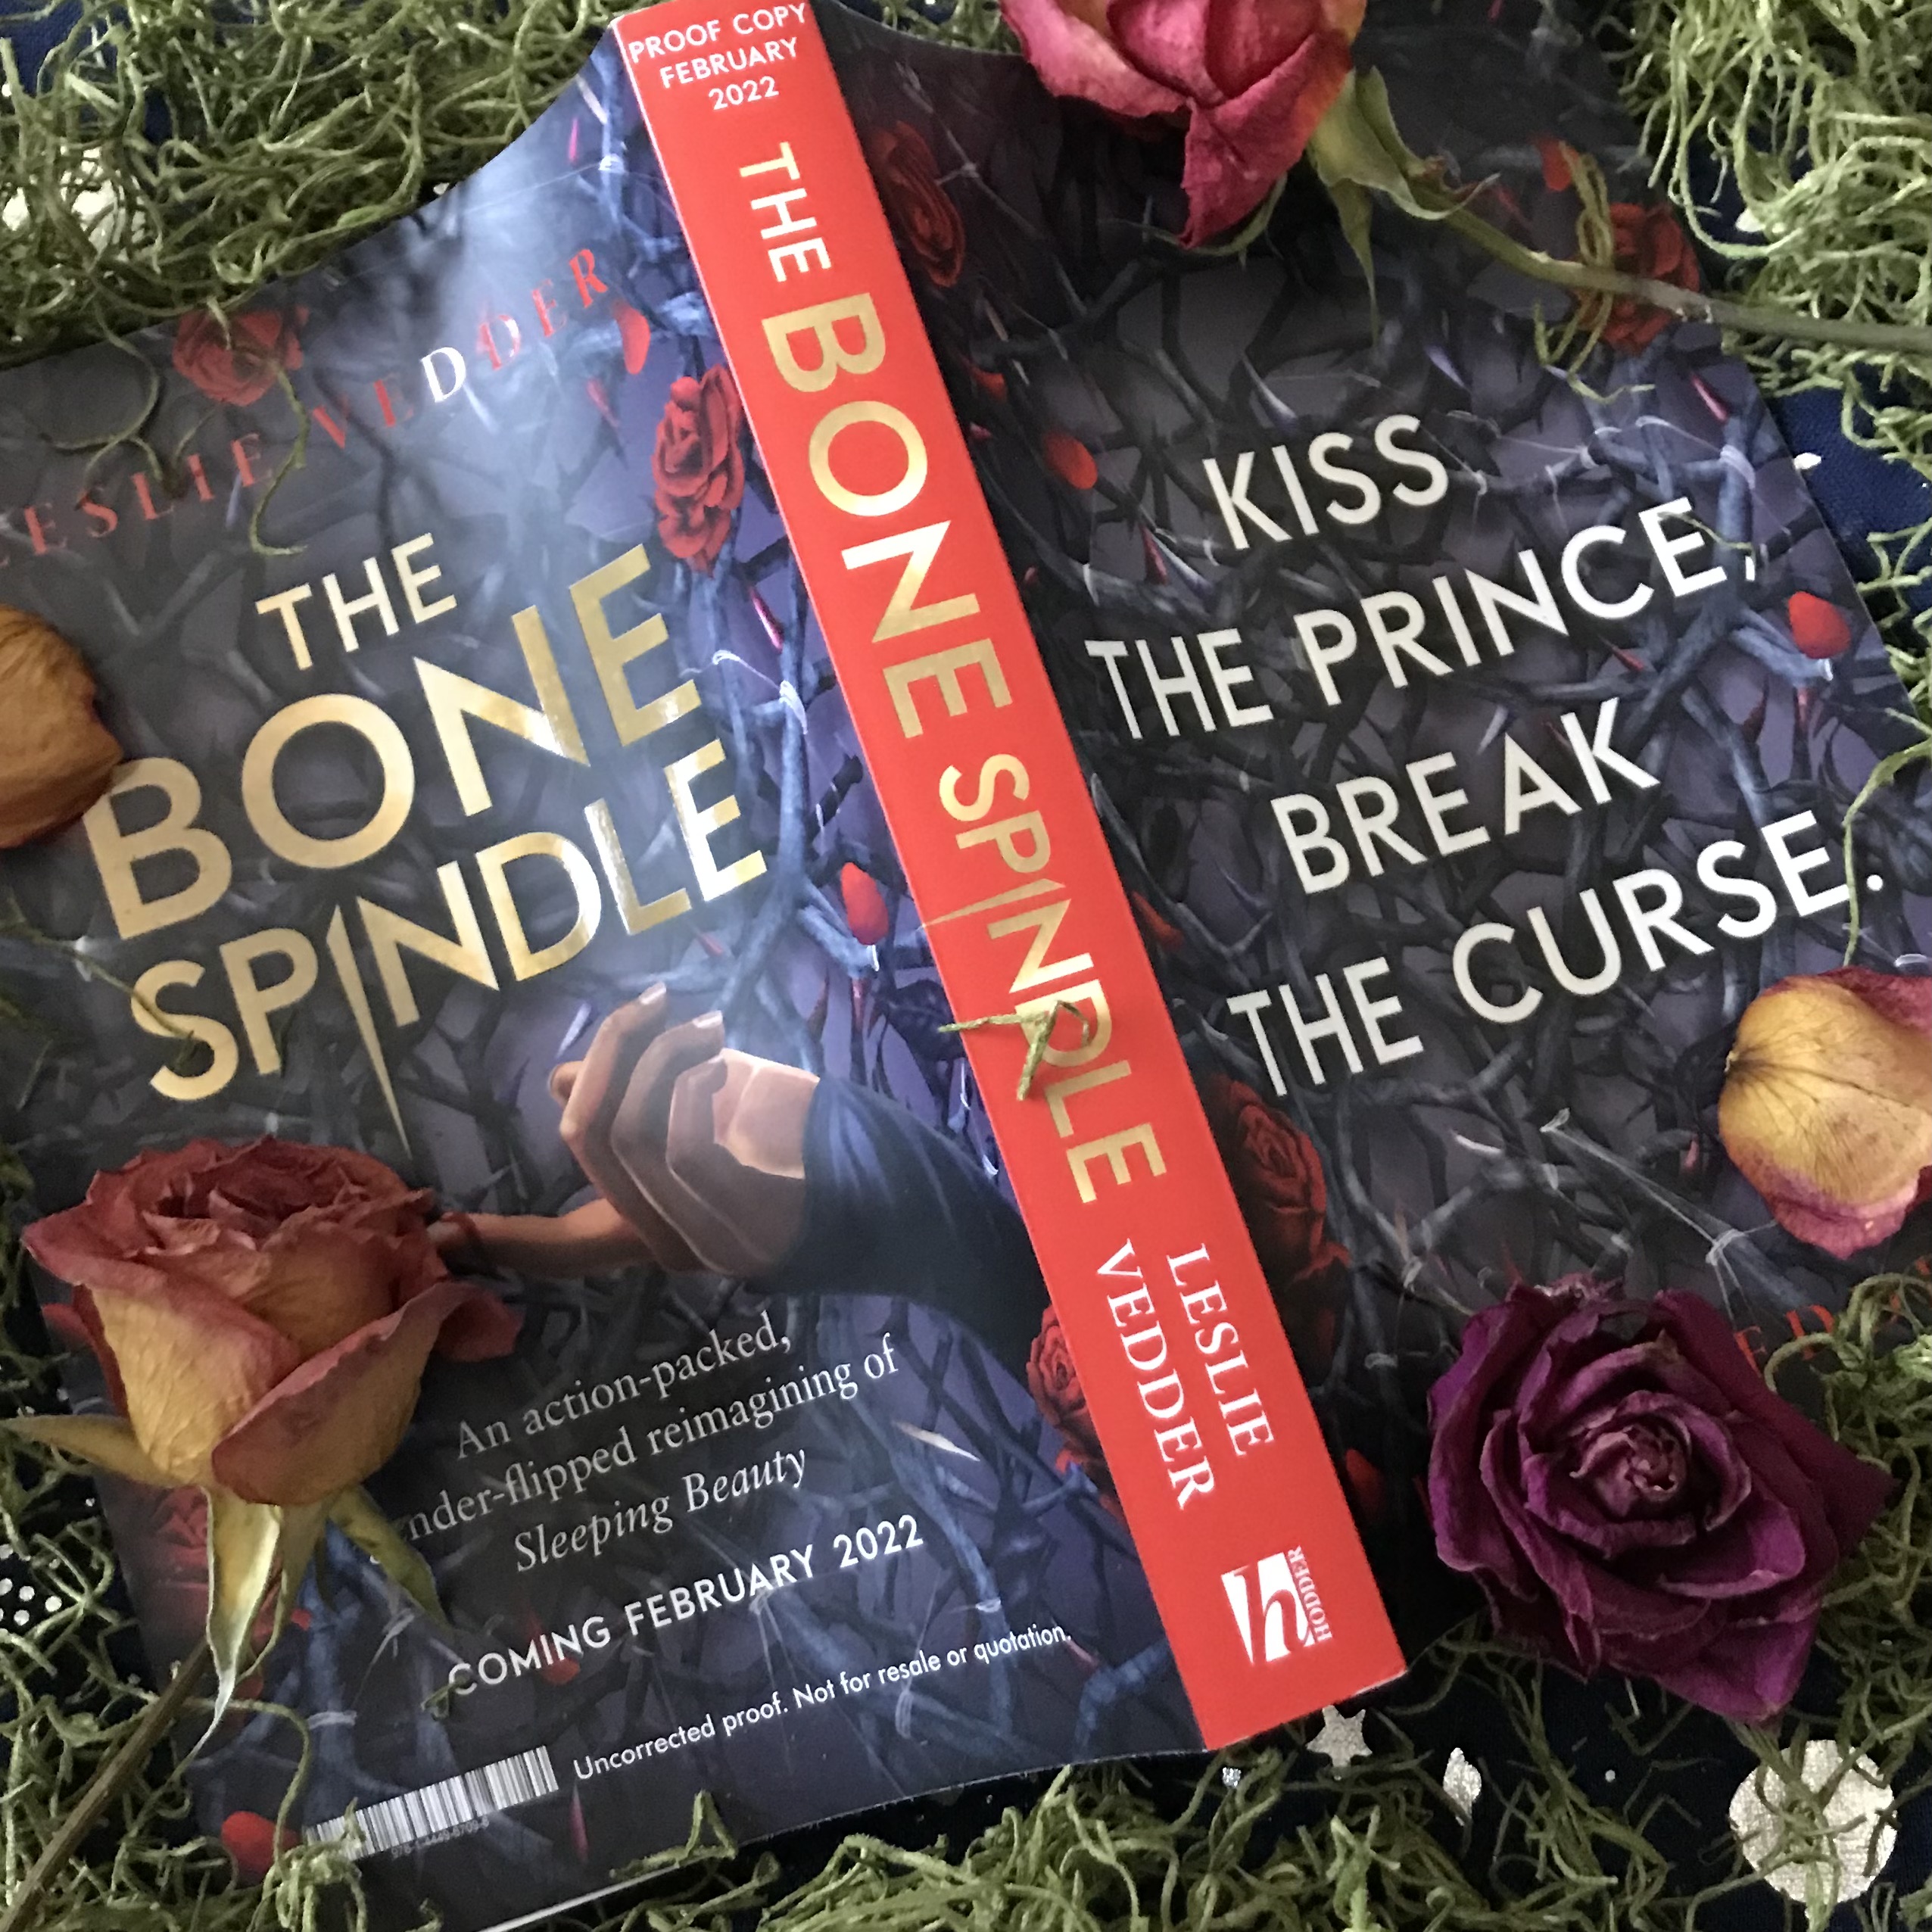 A proof of The Bone Spindle by Leslie Vedder laying on it's open pages, so you can see front and back cover. It's laying on a navy scarf with metallic silver moons and stars. It's surrounded by dried, stringy, green foliage, with three dried roses and two rose petals.